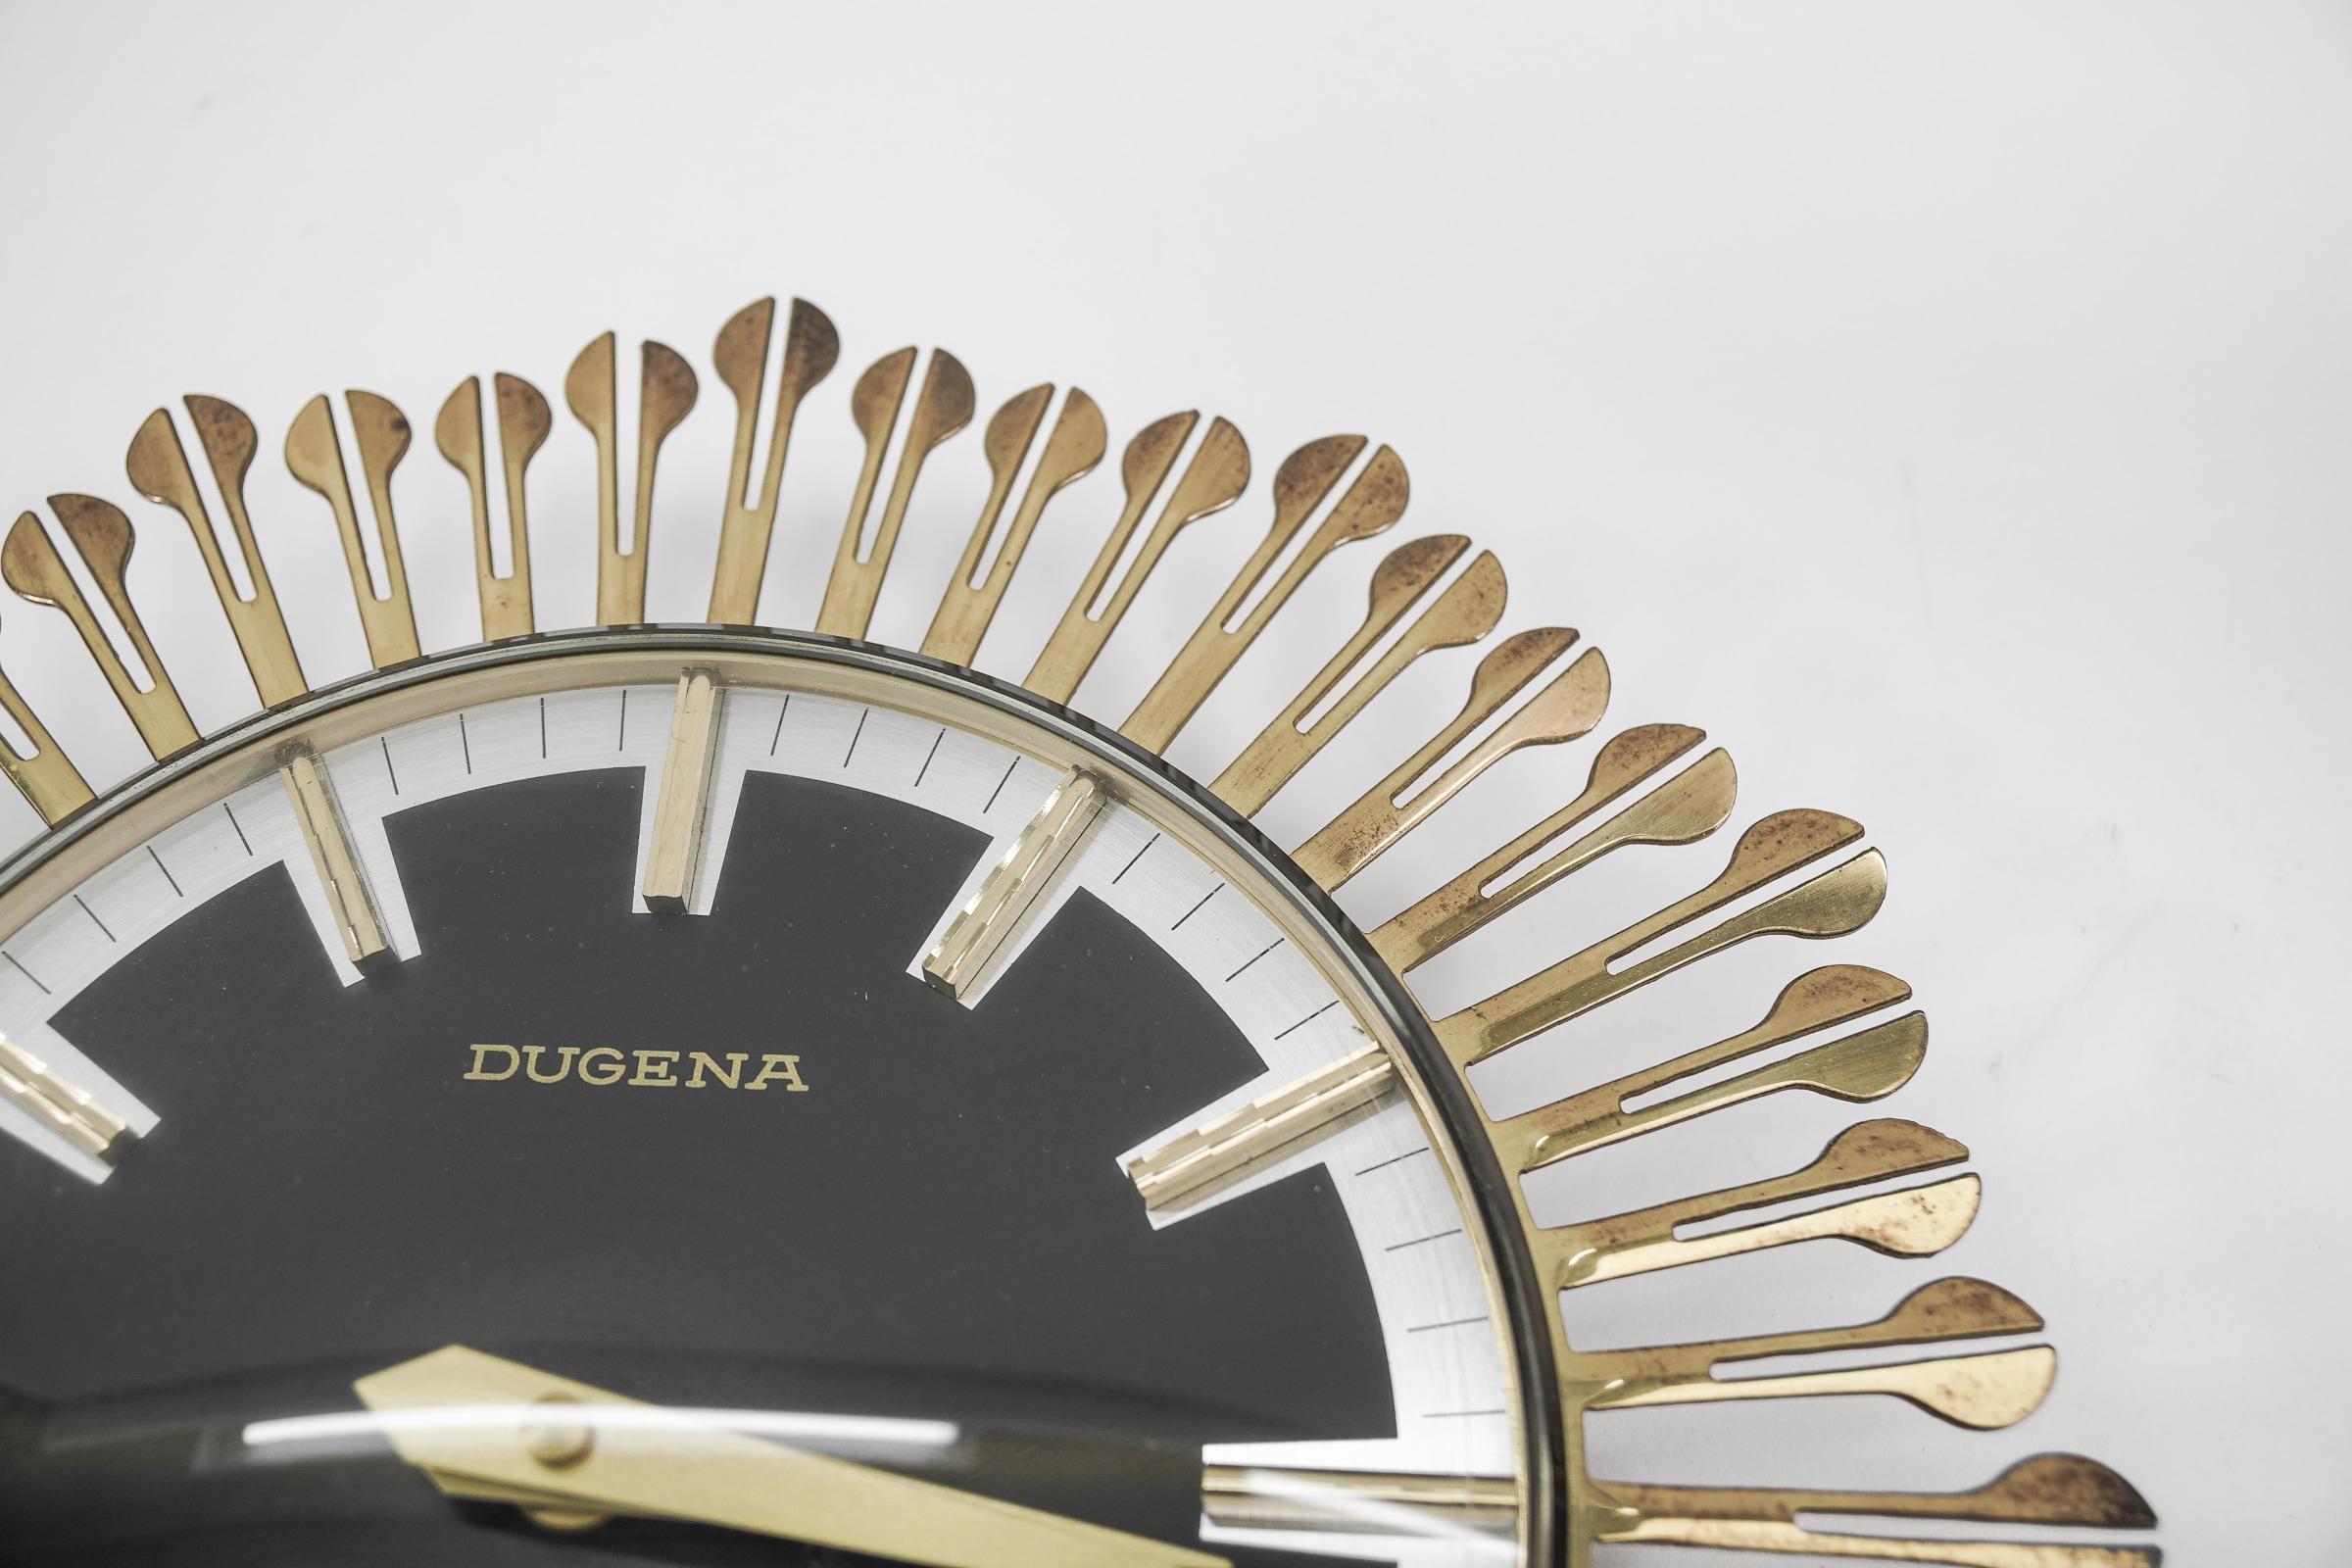 Mid-Century Modern Sunburst Wall Clock by Dugena in Brass, 1960s, Germany In Good Condition For Sale In Nürnberg, Bayern